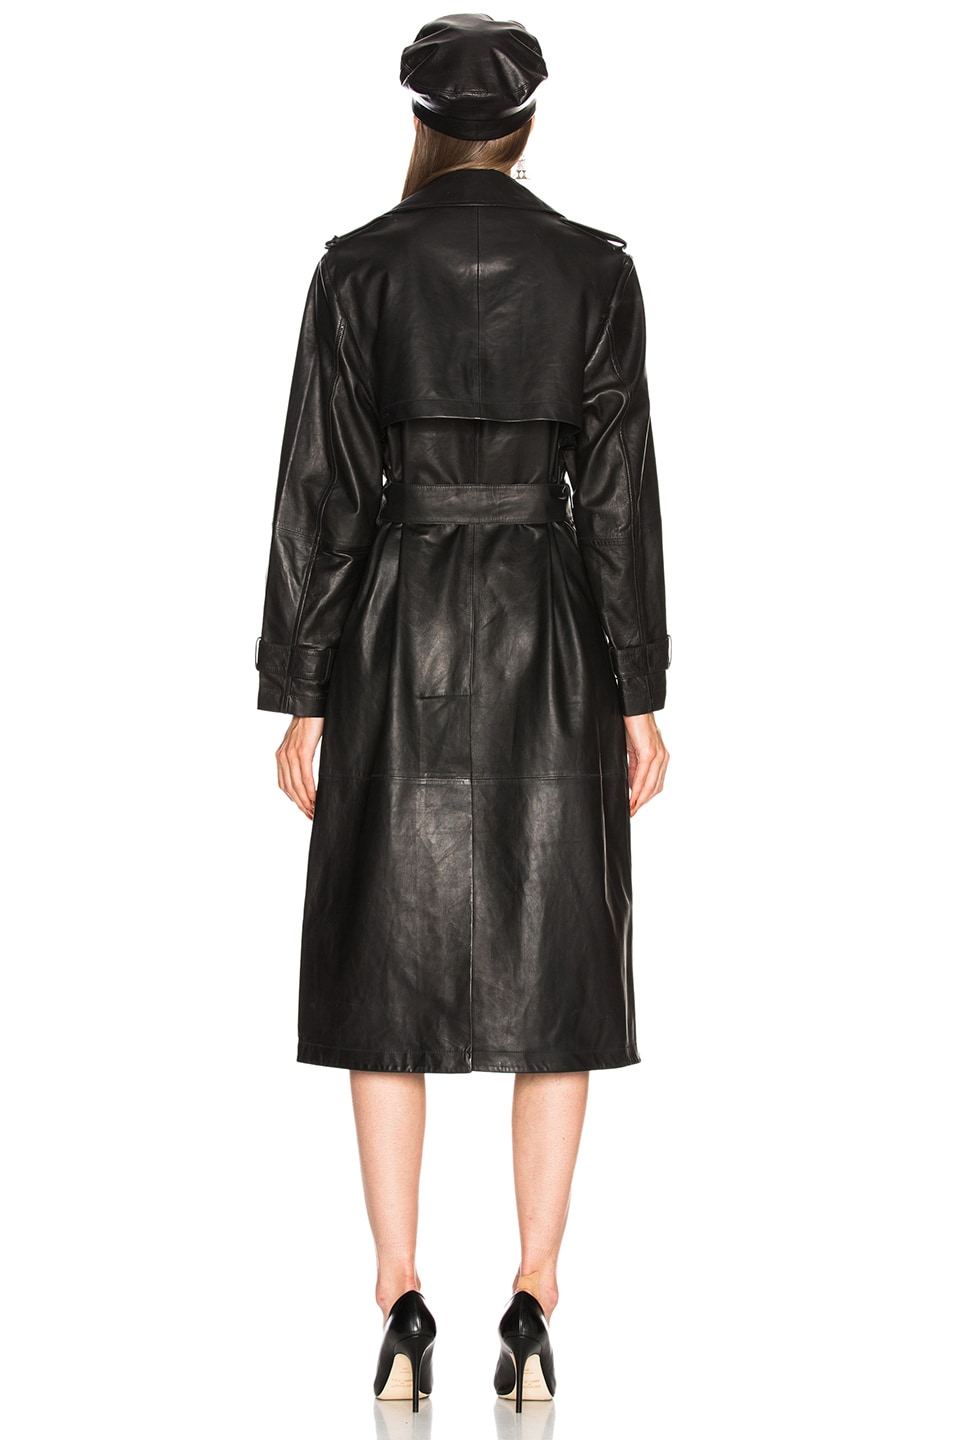 Palmer Girls x Miss Sixty Leather Trench Coat in Black | FWRD